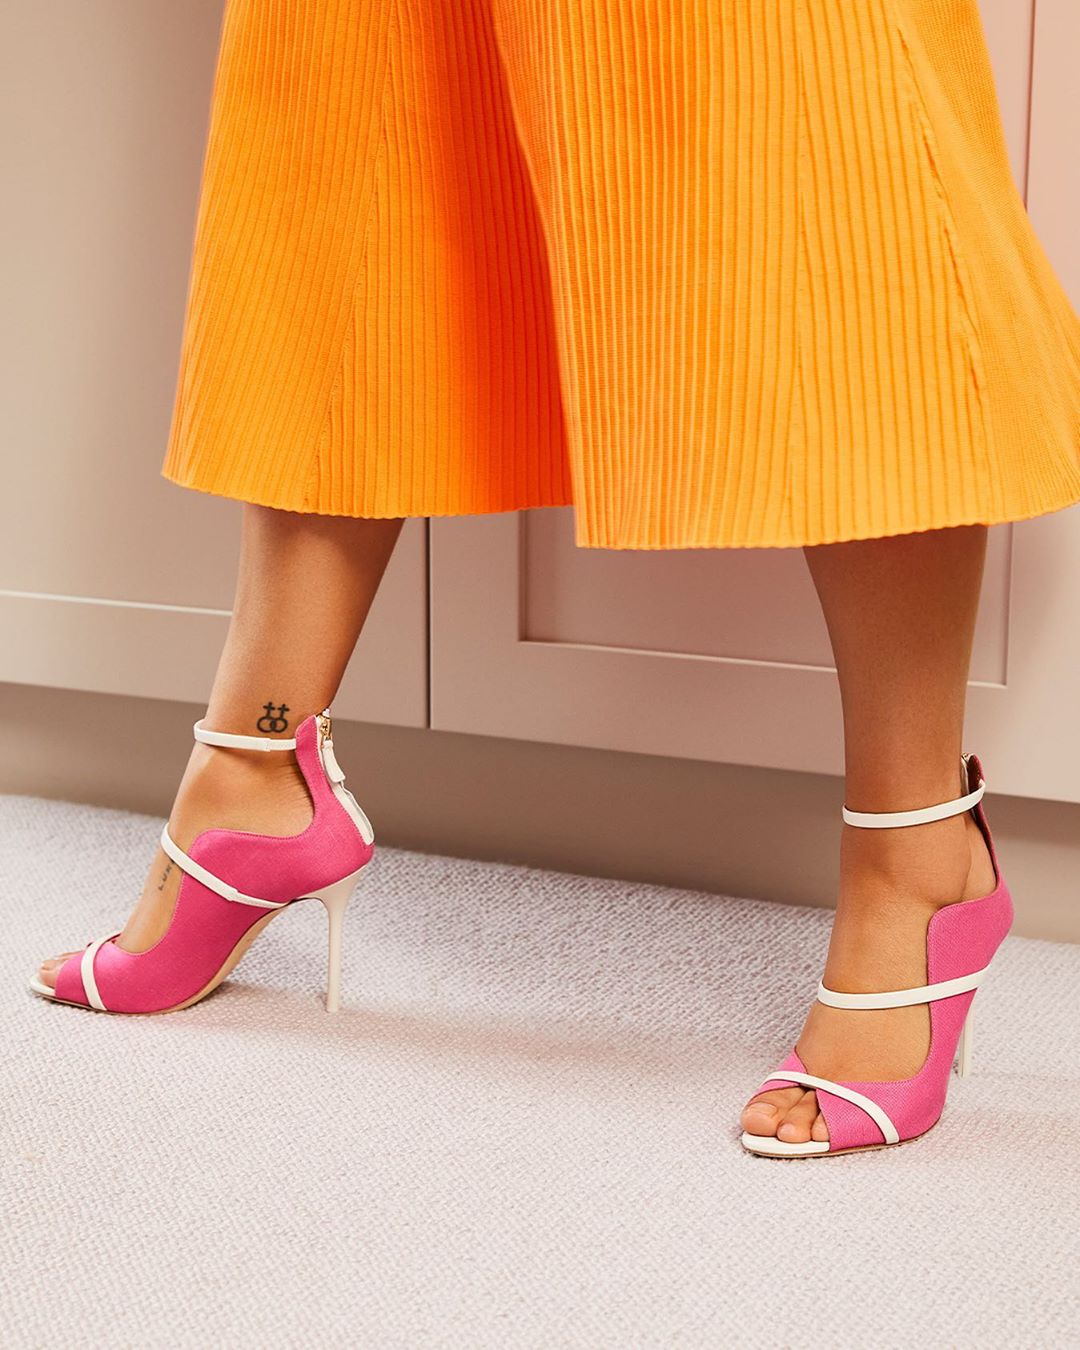 THE OUTNET - If your shoes don't make you want to get up and dance when you put them on, then you need @malonesouliers.

Shop all your favorite Instagram looks, just visit #linkinbio